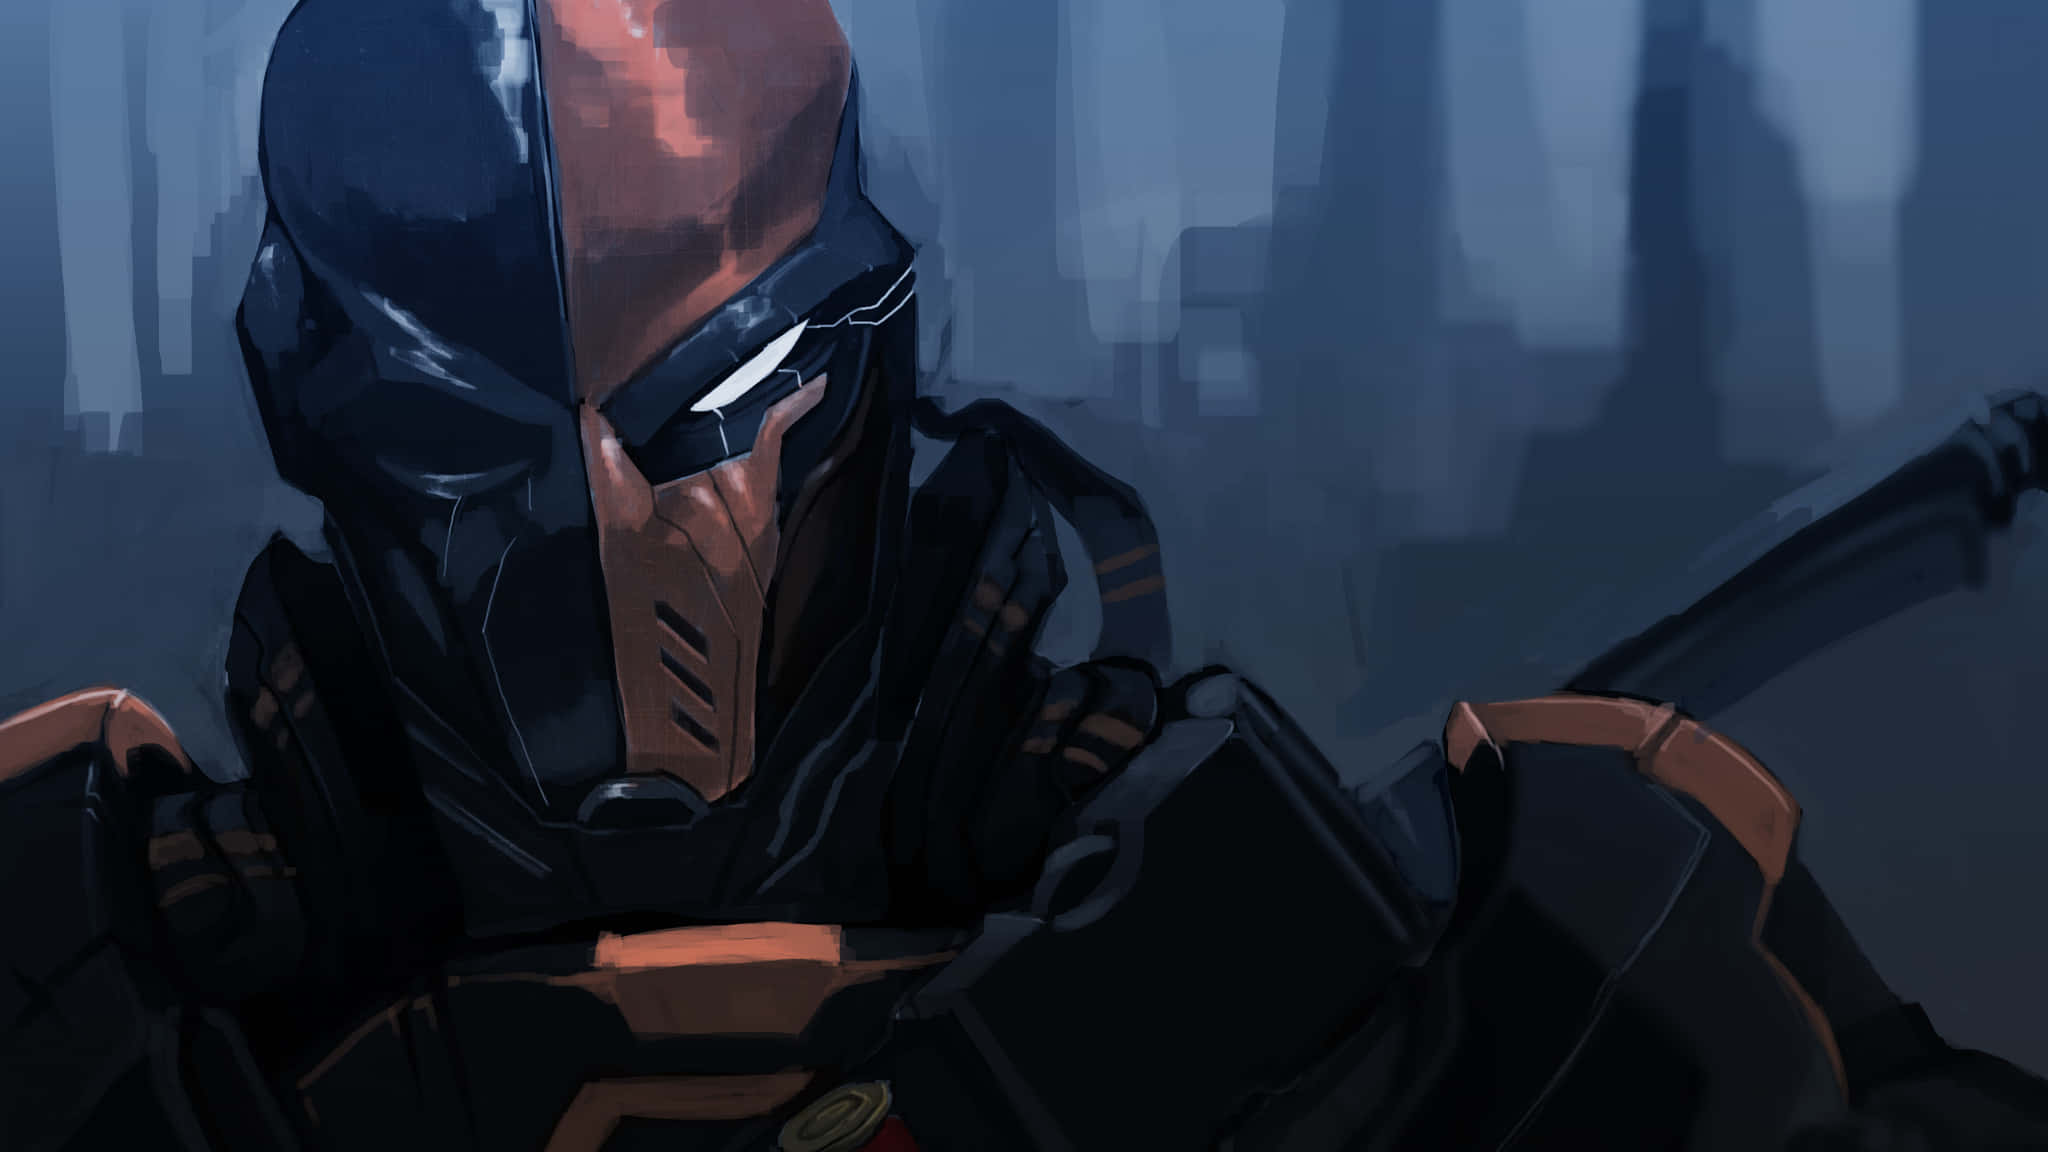 Get an up-close look at DC's most sinister supervillain Deathstroke